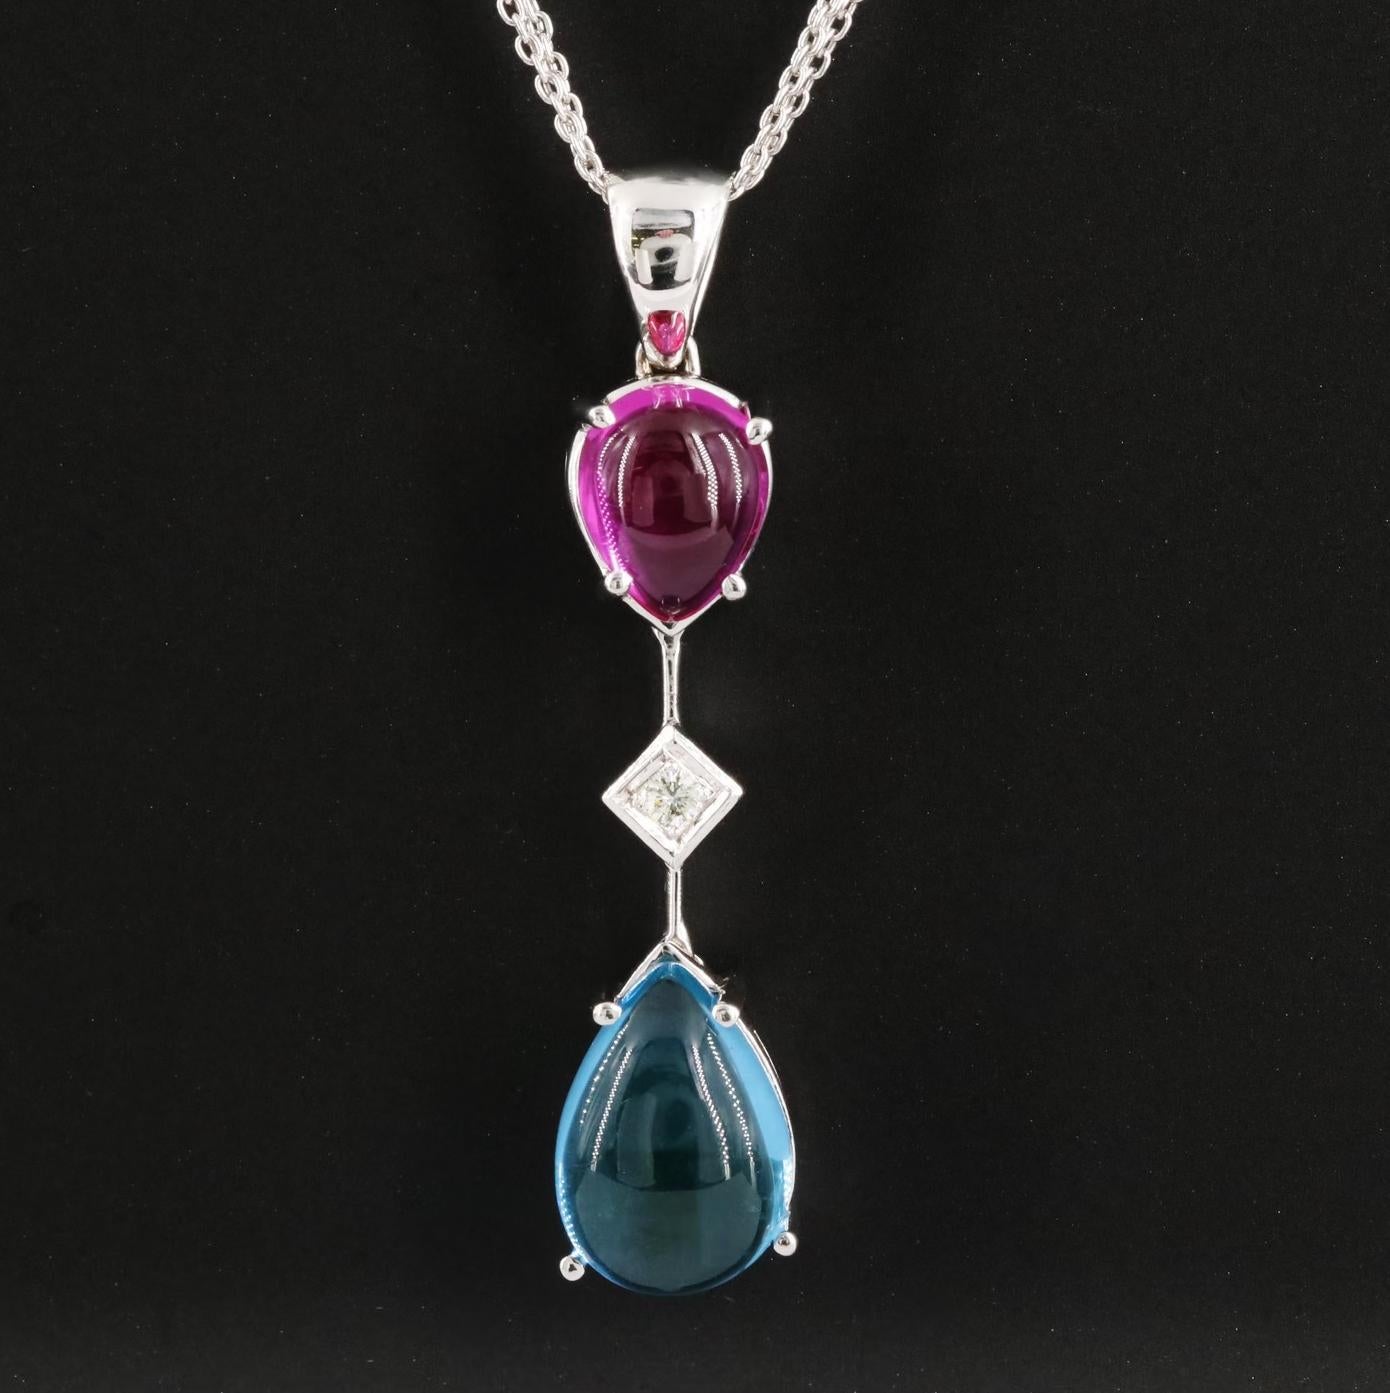 Designer Necklace, heavy and well made

NEW with tags, Tag Price $8500

18K solid White gold, stamped 750

6.1 CWT of Diamond and Tourmaline (Pink and Blue)

Necklace chain is 3 stands 18K Solid white gold chain, 15- 17 inches adjustable, heavy